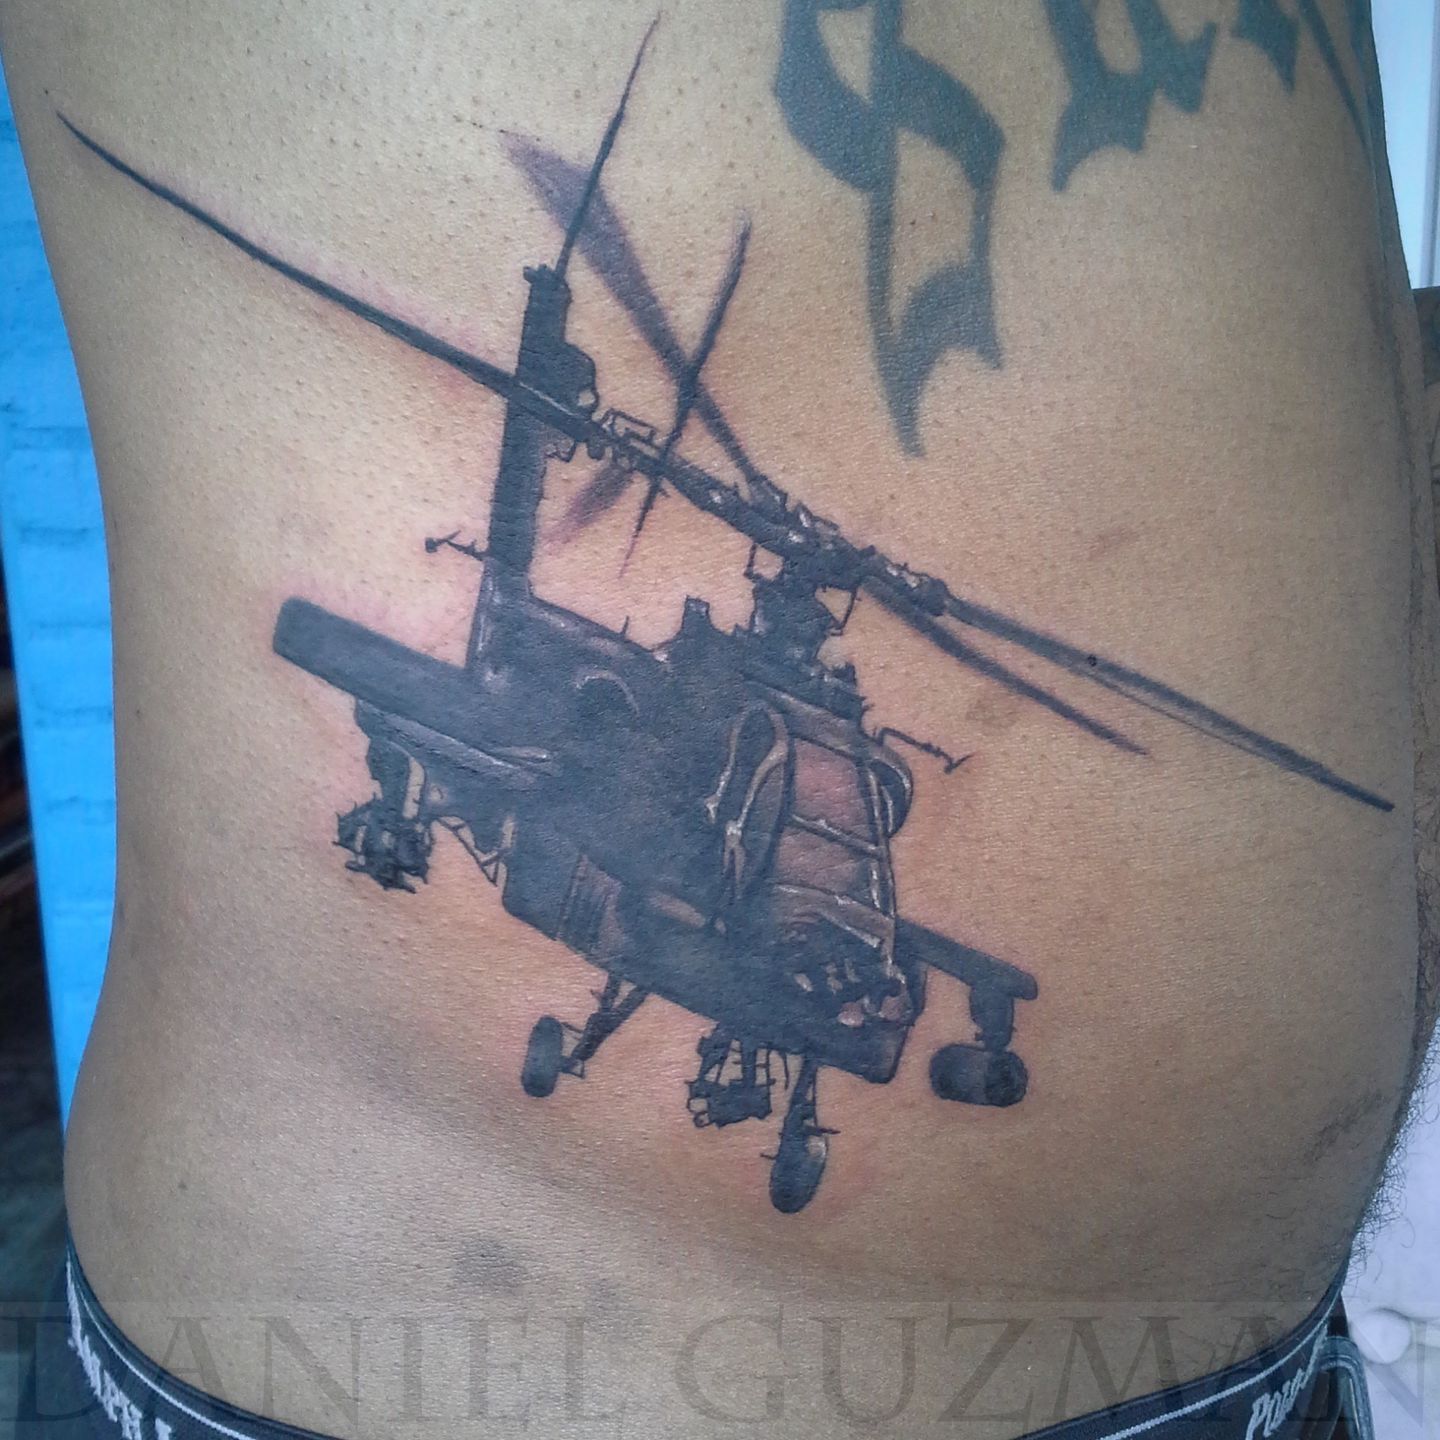 helicopter in Tattoos  Search in 13M Tattoos Now  Tattoodo